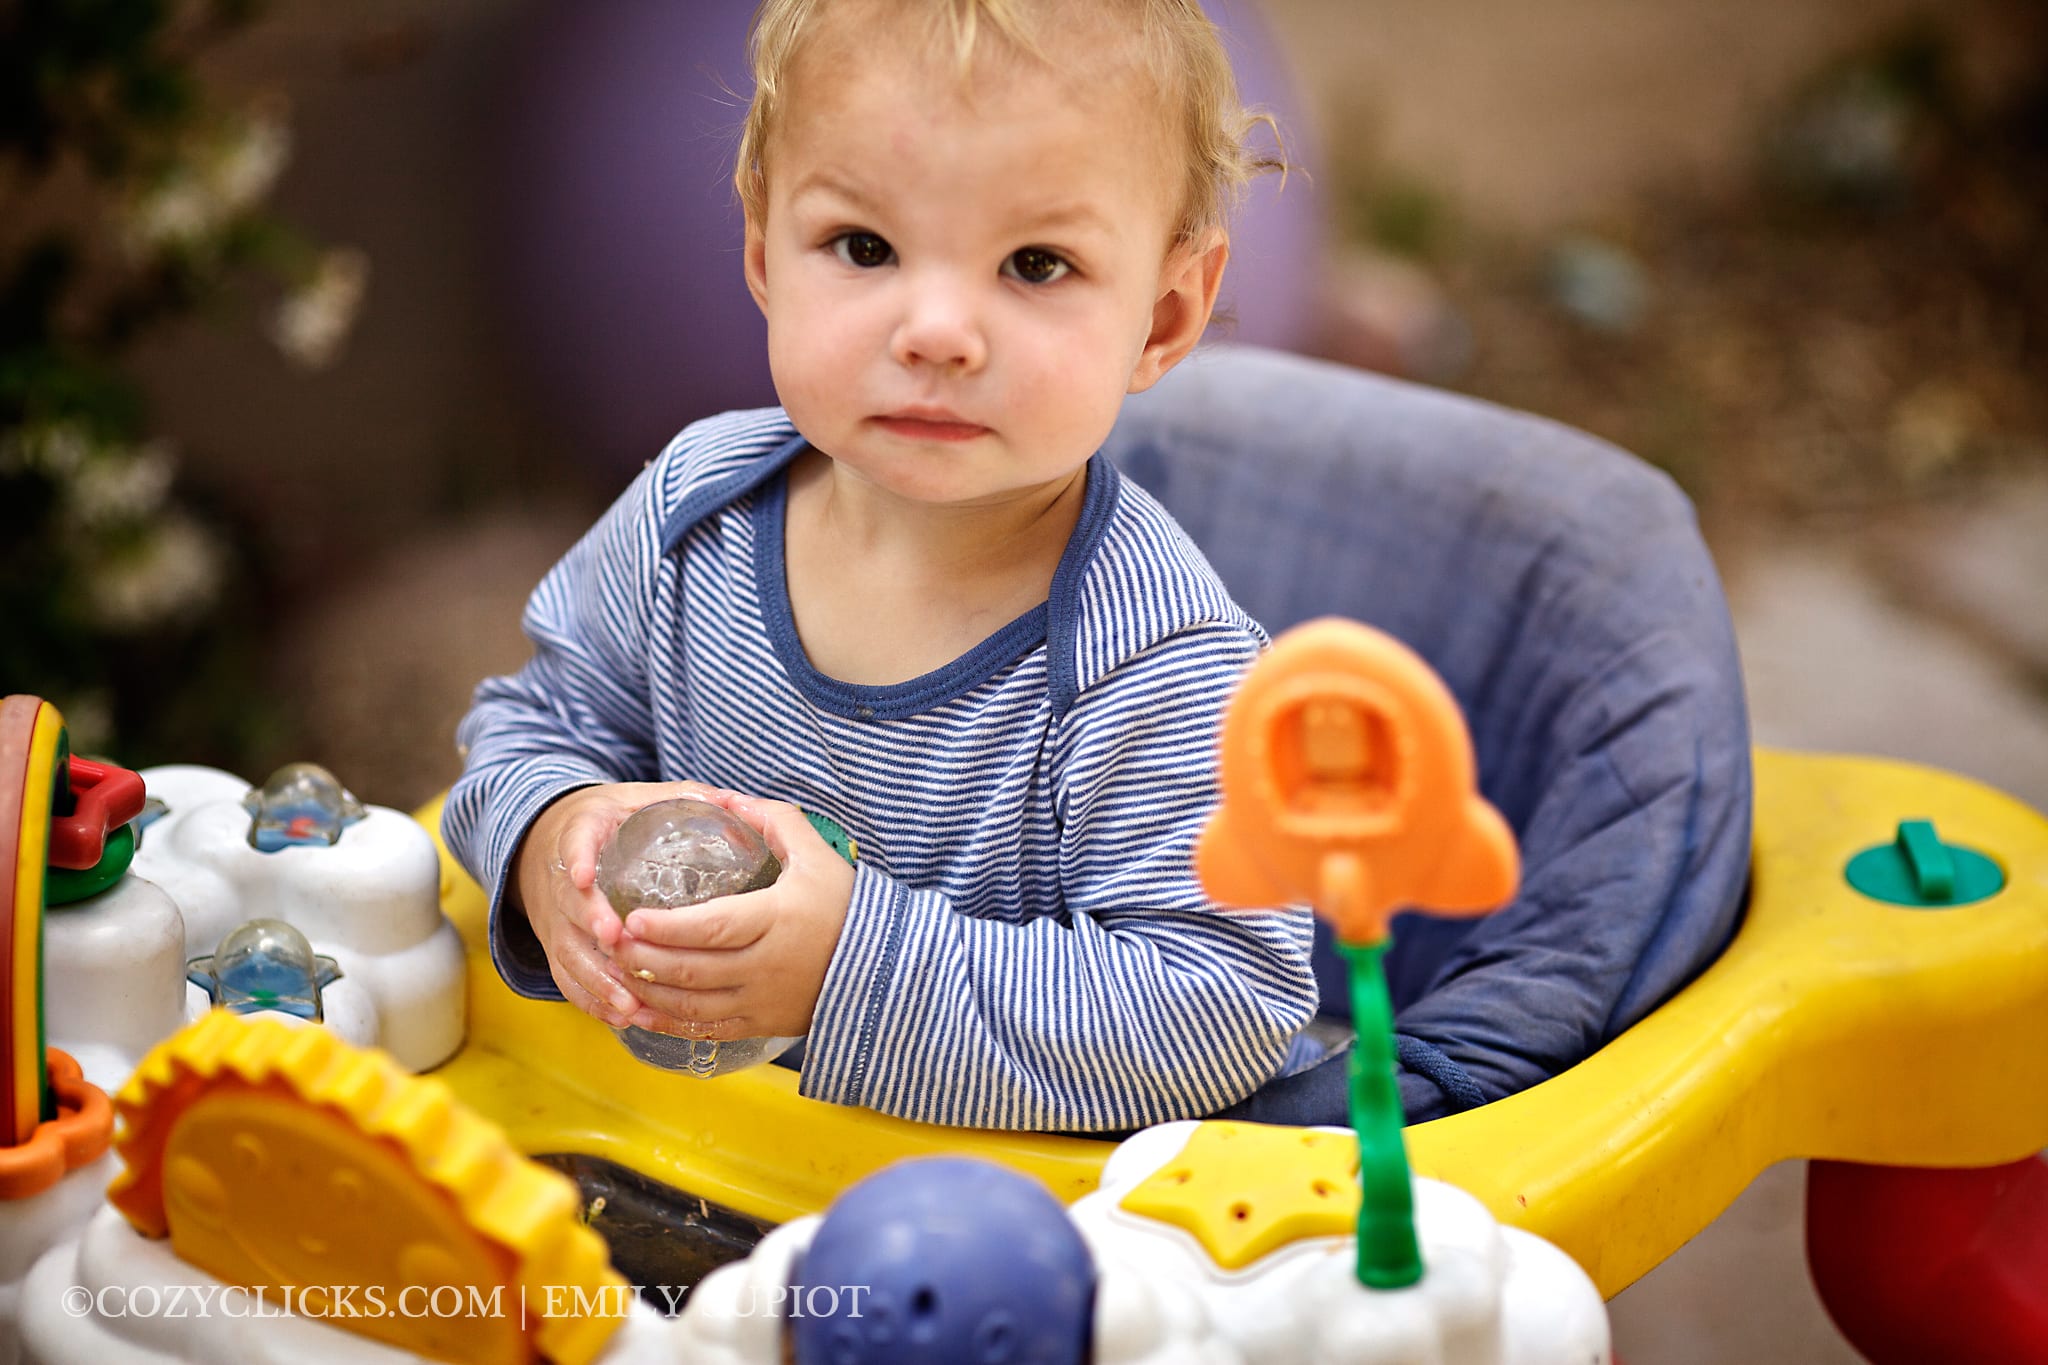 Even babies can have fun cold sensory experiences